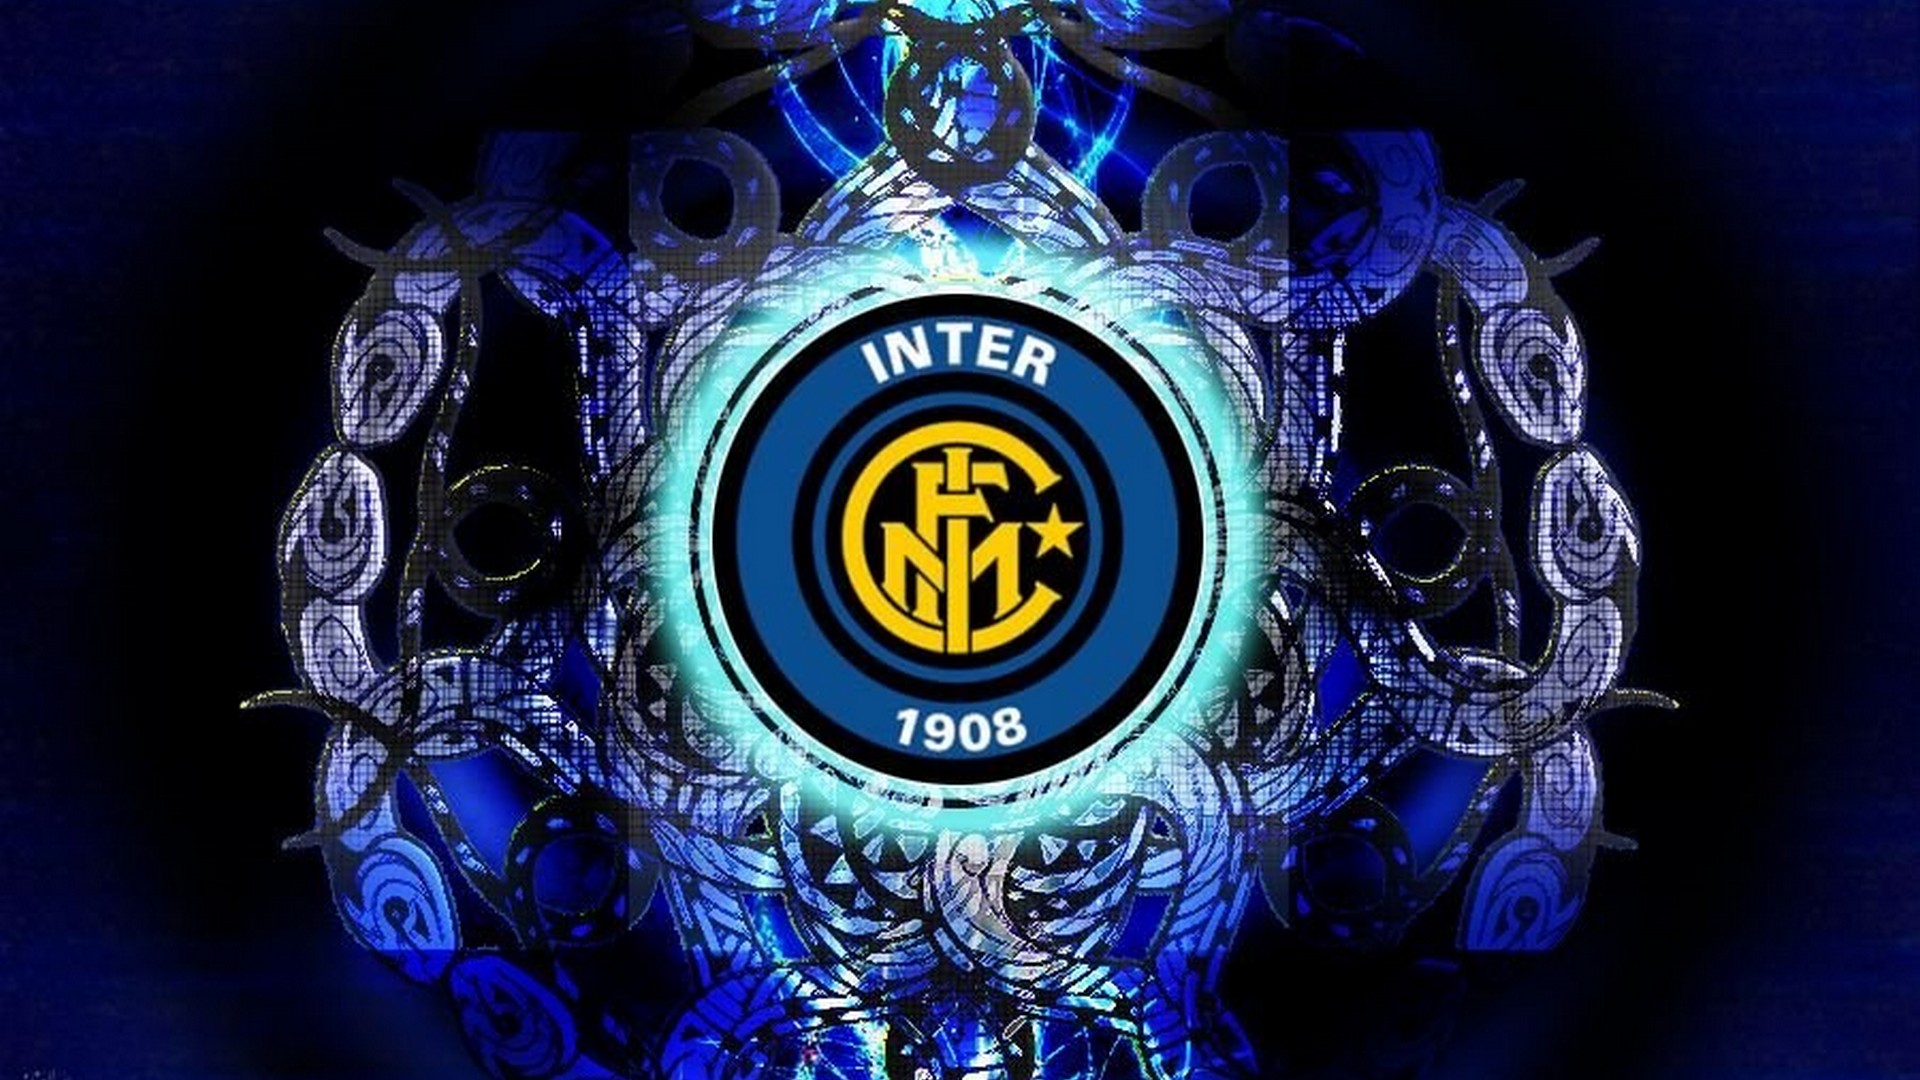 Inter Milan Wallpaper With high-resolution 1920X1080 pixel. You can use this wallpaper for your Desktop Computers, Mac Screensavers, Windows Backgrounds, iPhone Wallpapers, Tablet or Android Lock screen and another Mobile device